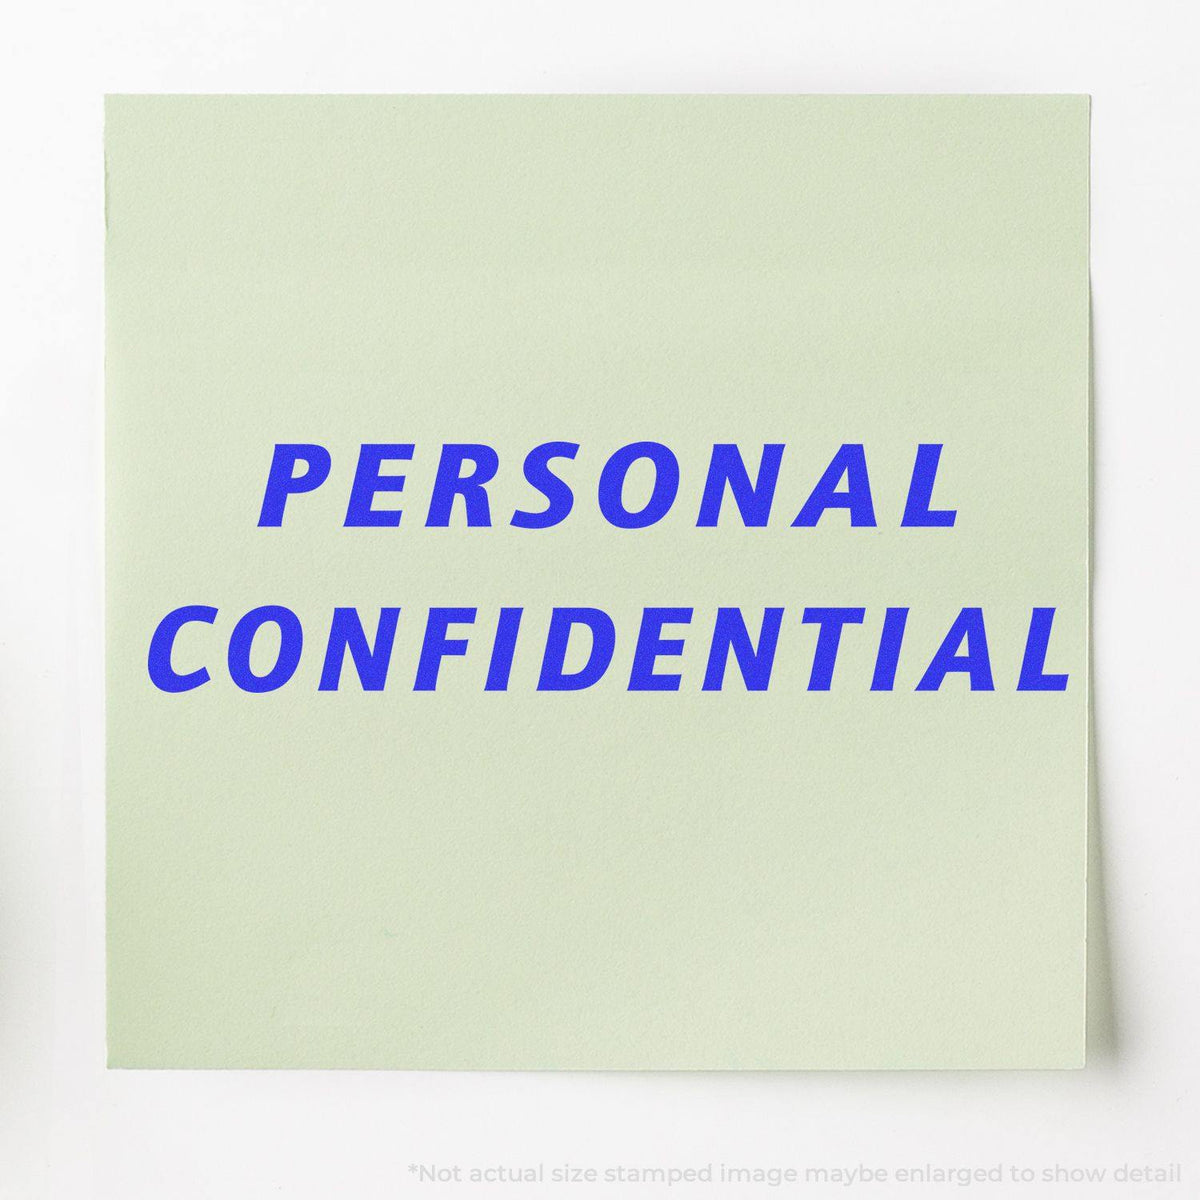 In Use Slim Pre-Inked Italic Personal Confidential Stamp Image